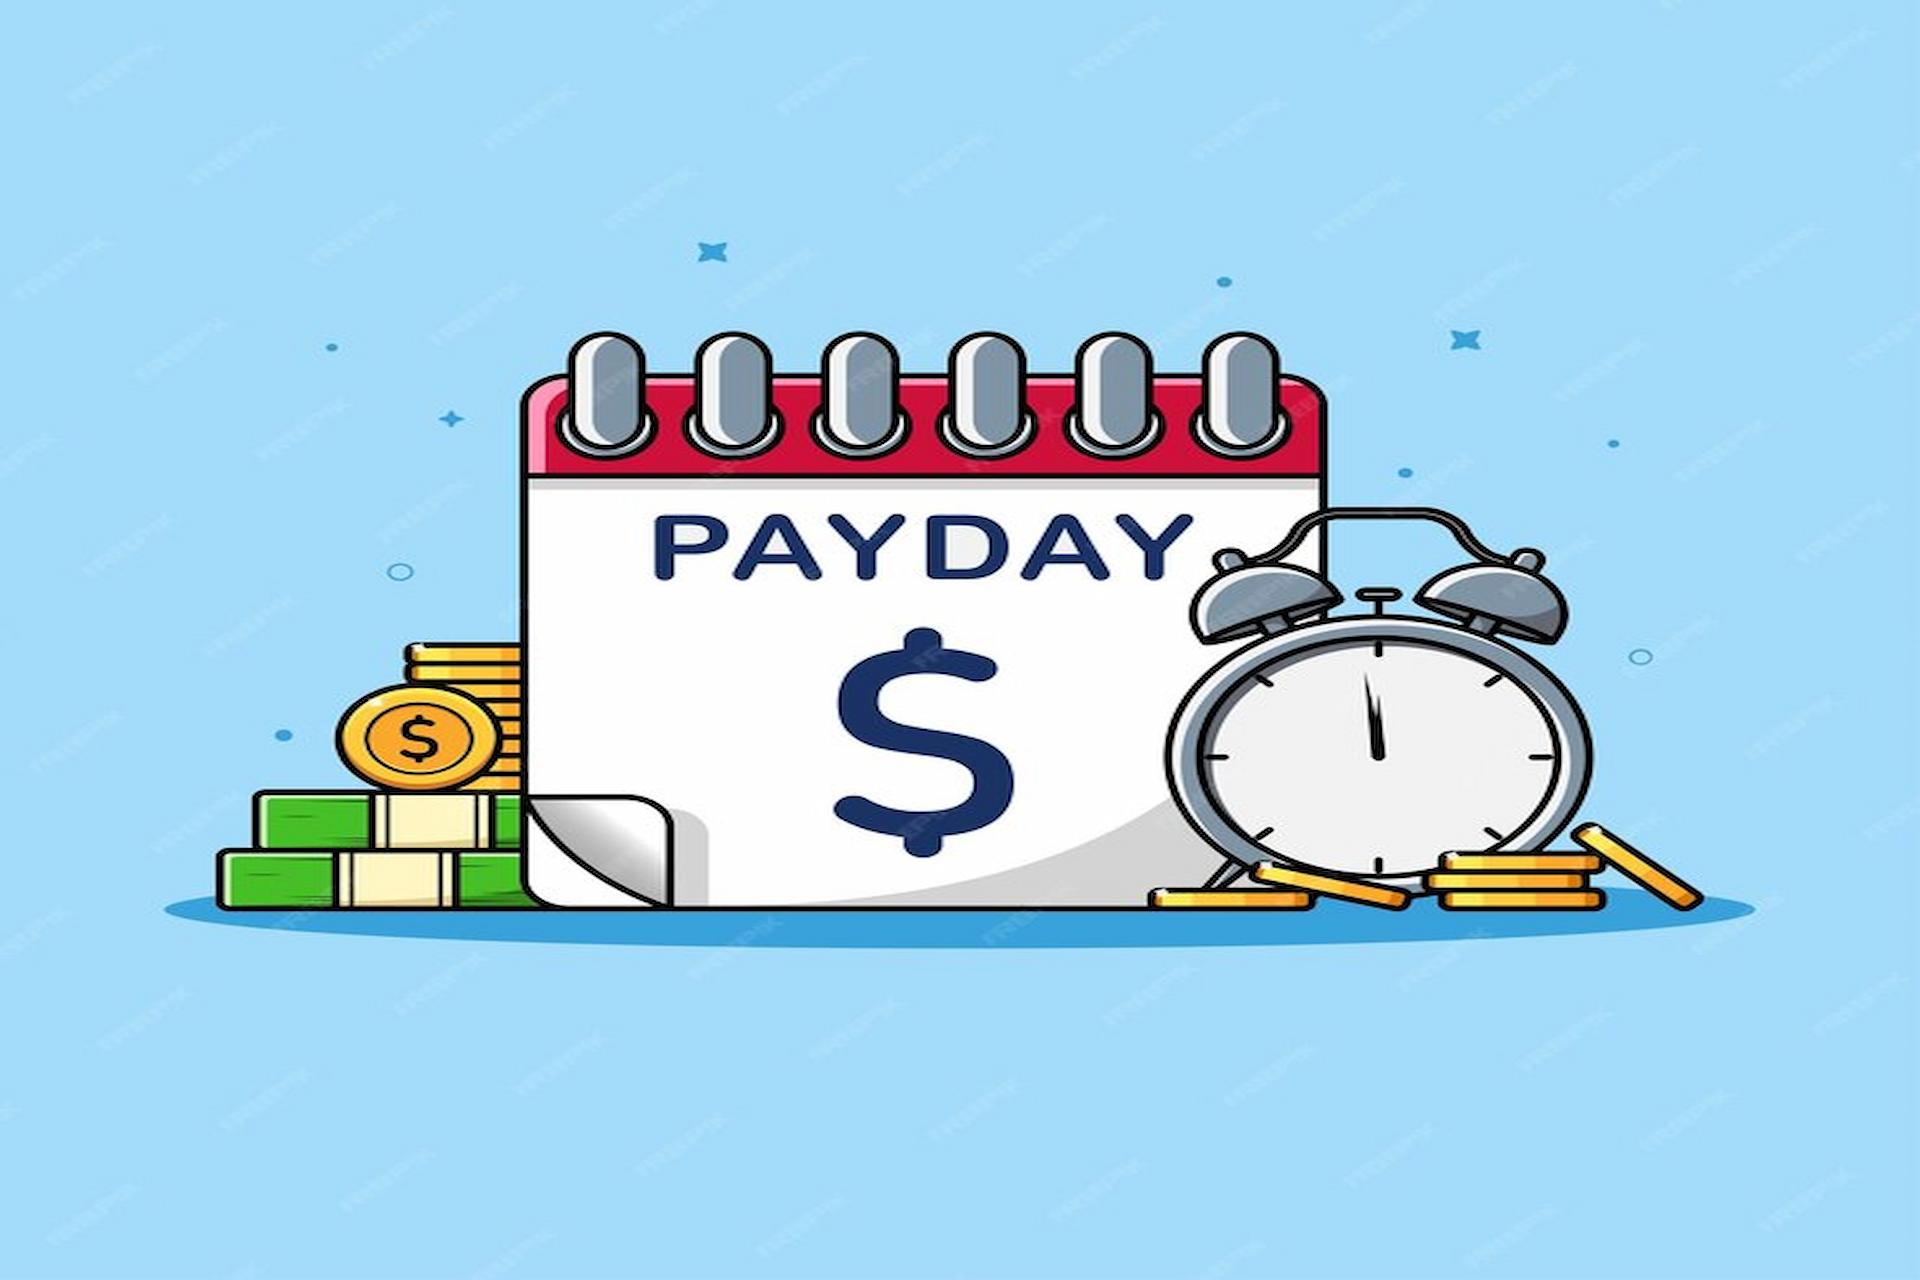 same day payday loans